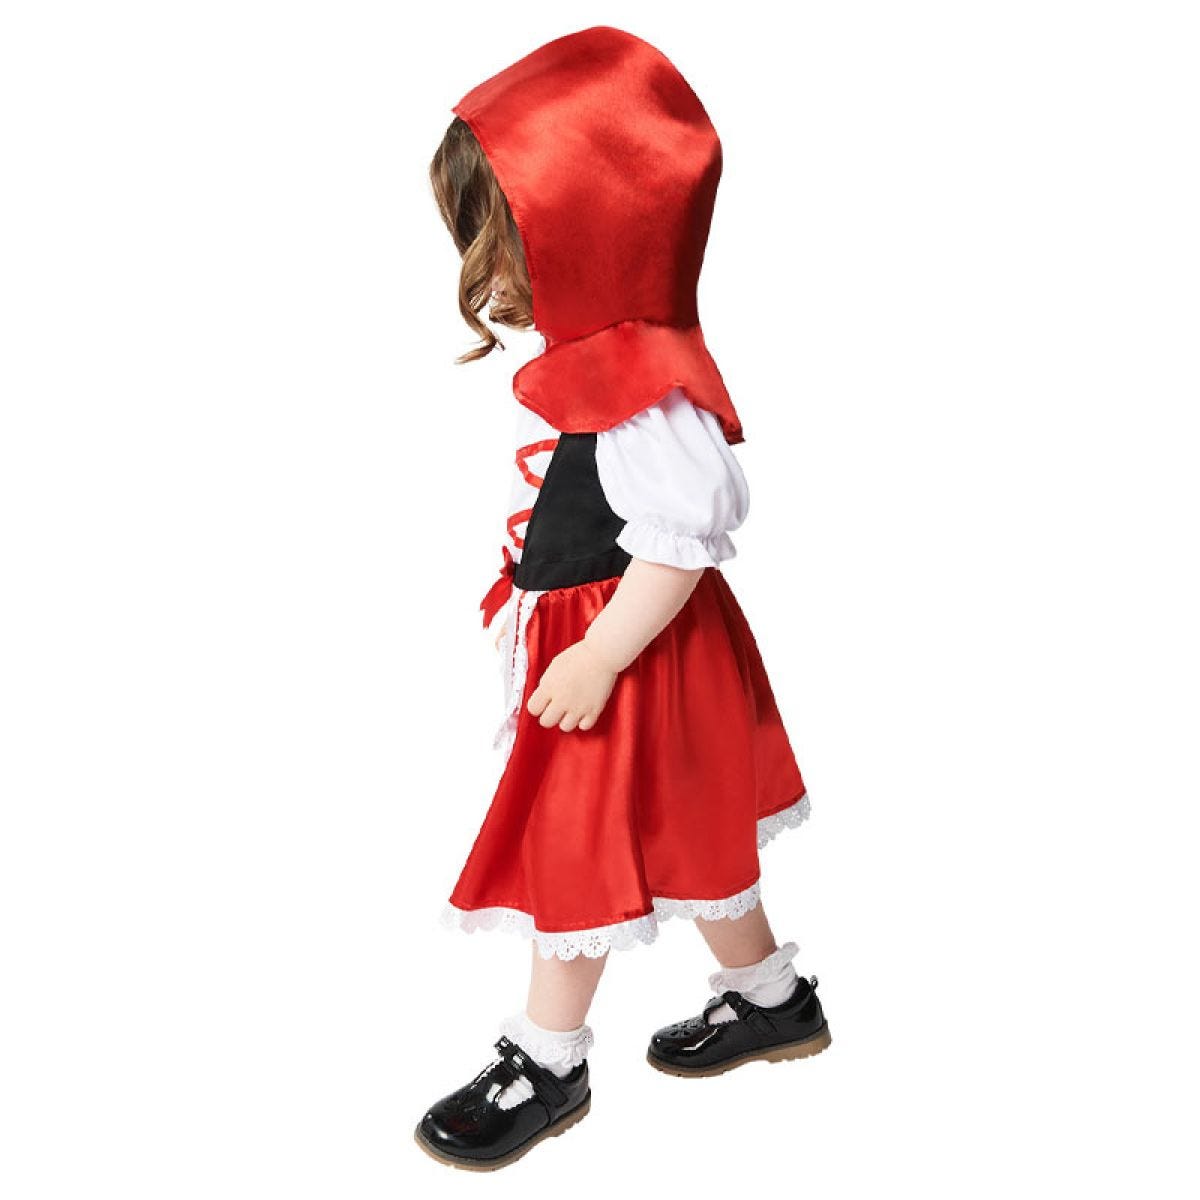 Red Riding Hood Cutie - Baby and Toddler Costume